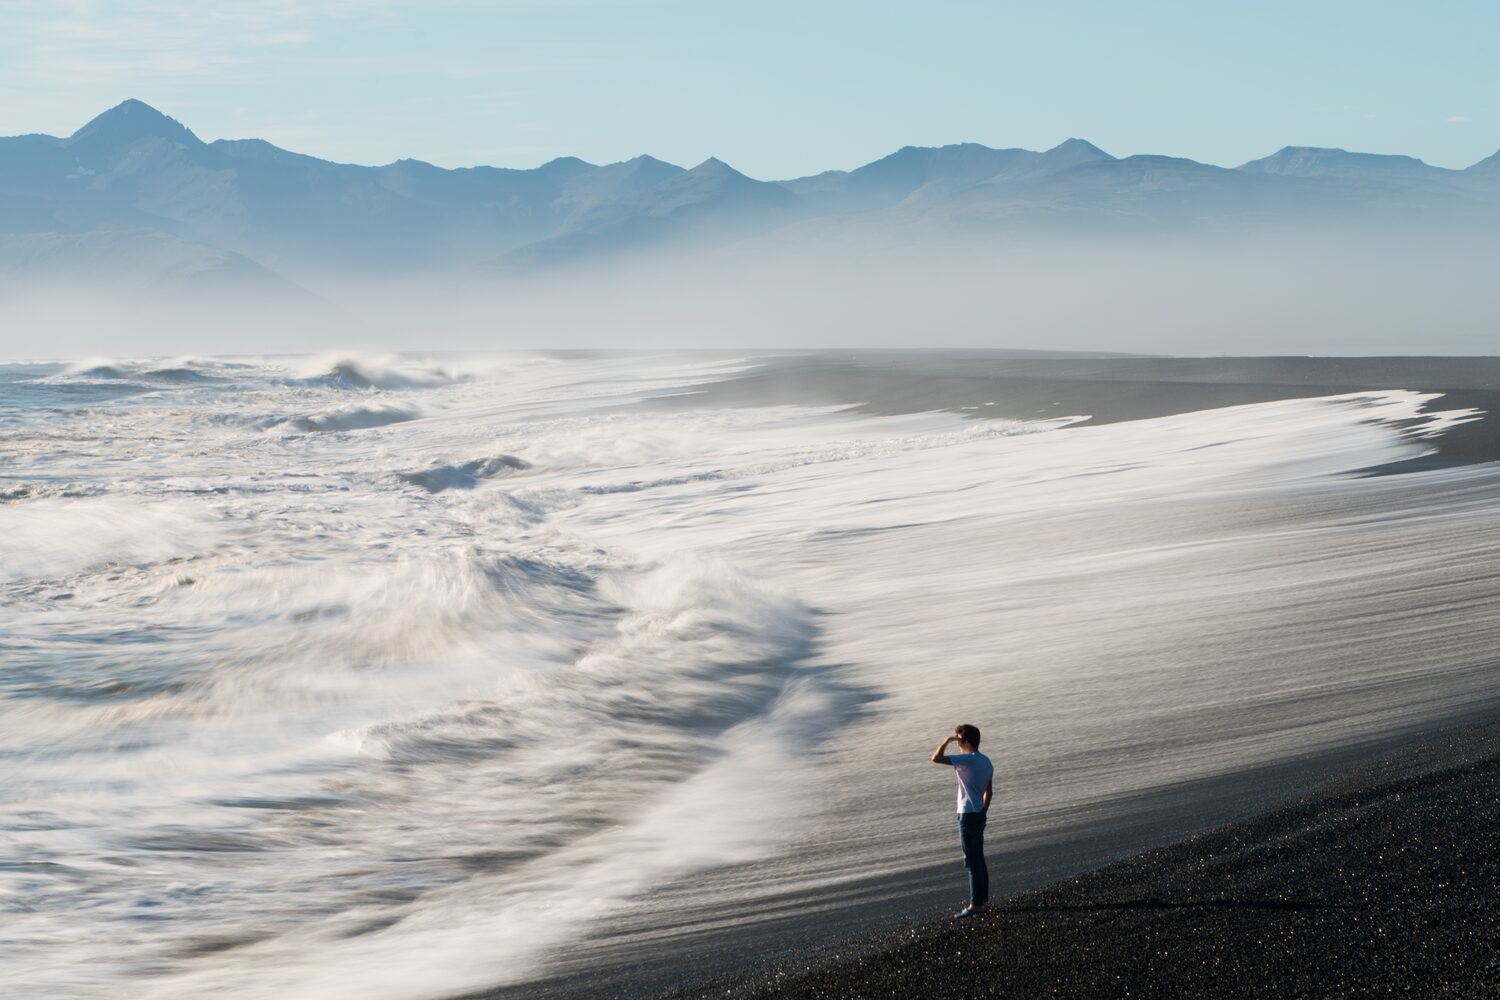 Man standing on black sand beach, Iceland, staring out at crashing ocean waves, with mountains in background.